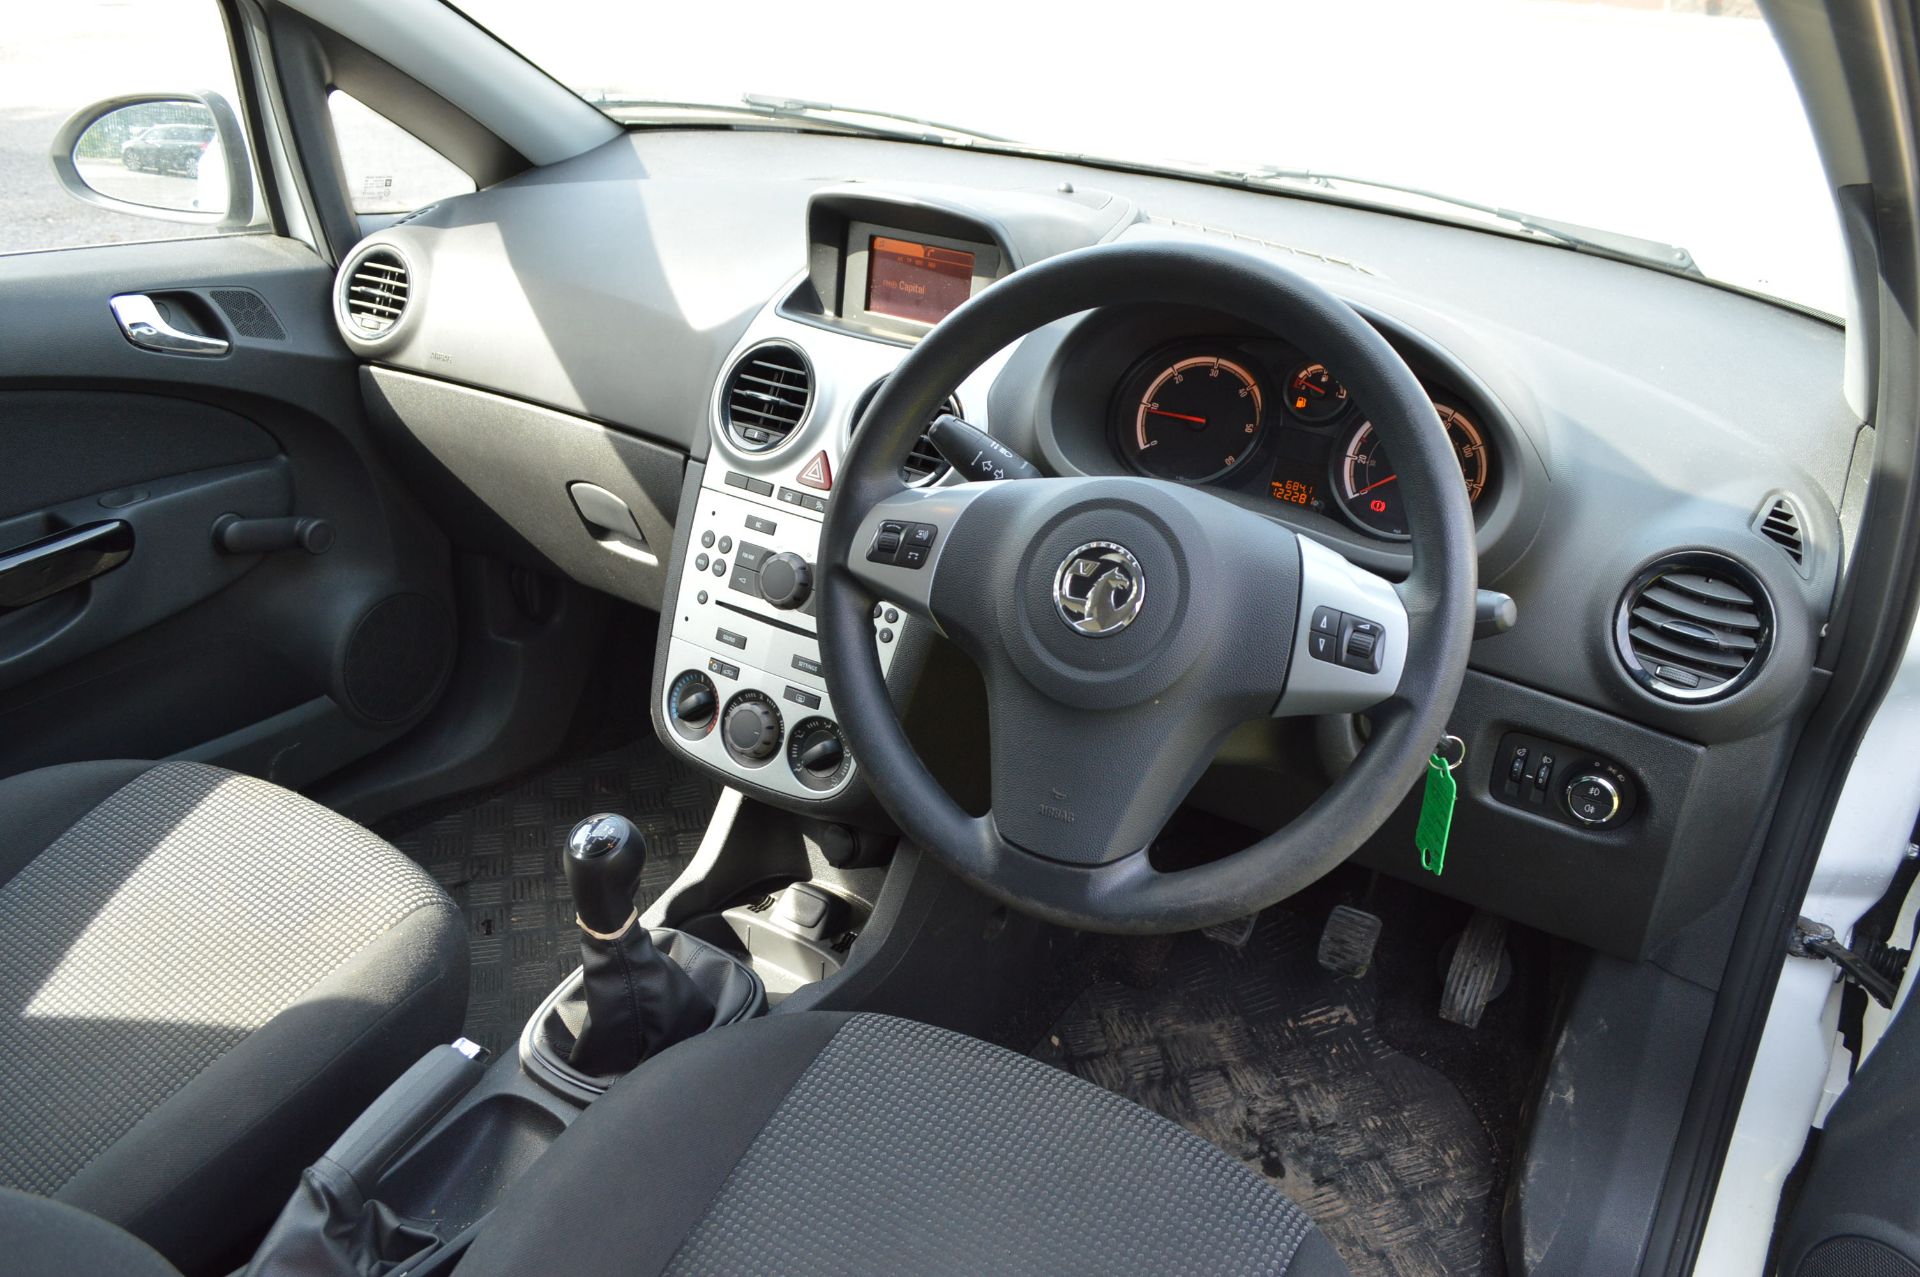 2012/12 REG VAUXHALL CORSA CDTI A/C, SHOWING 1 OWNER - Image 13 of 18